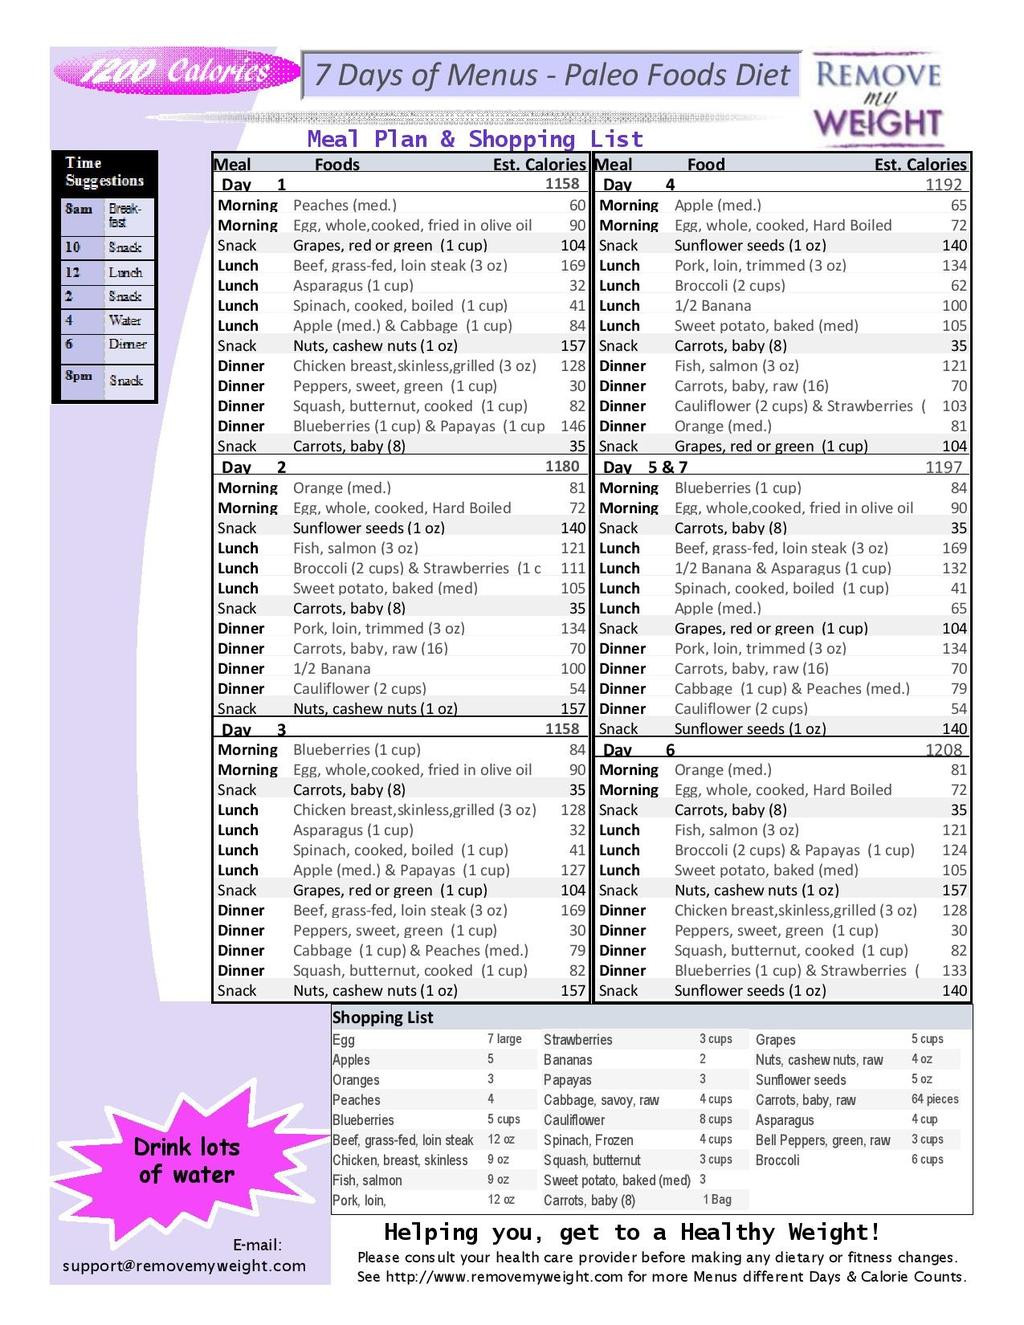 Paleo Diet Meal Plan For Weight Loss Pdf
 Paleo Diet Menu Plan 7 Days 1200 Calories with Shopping list